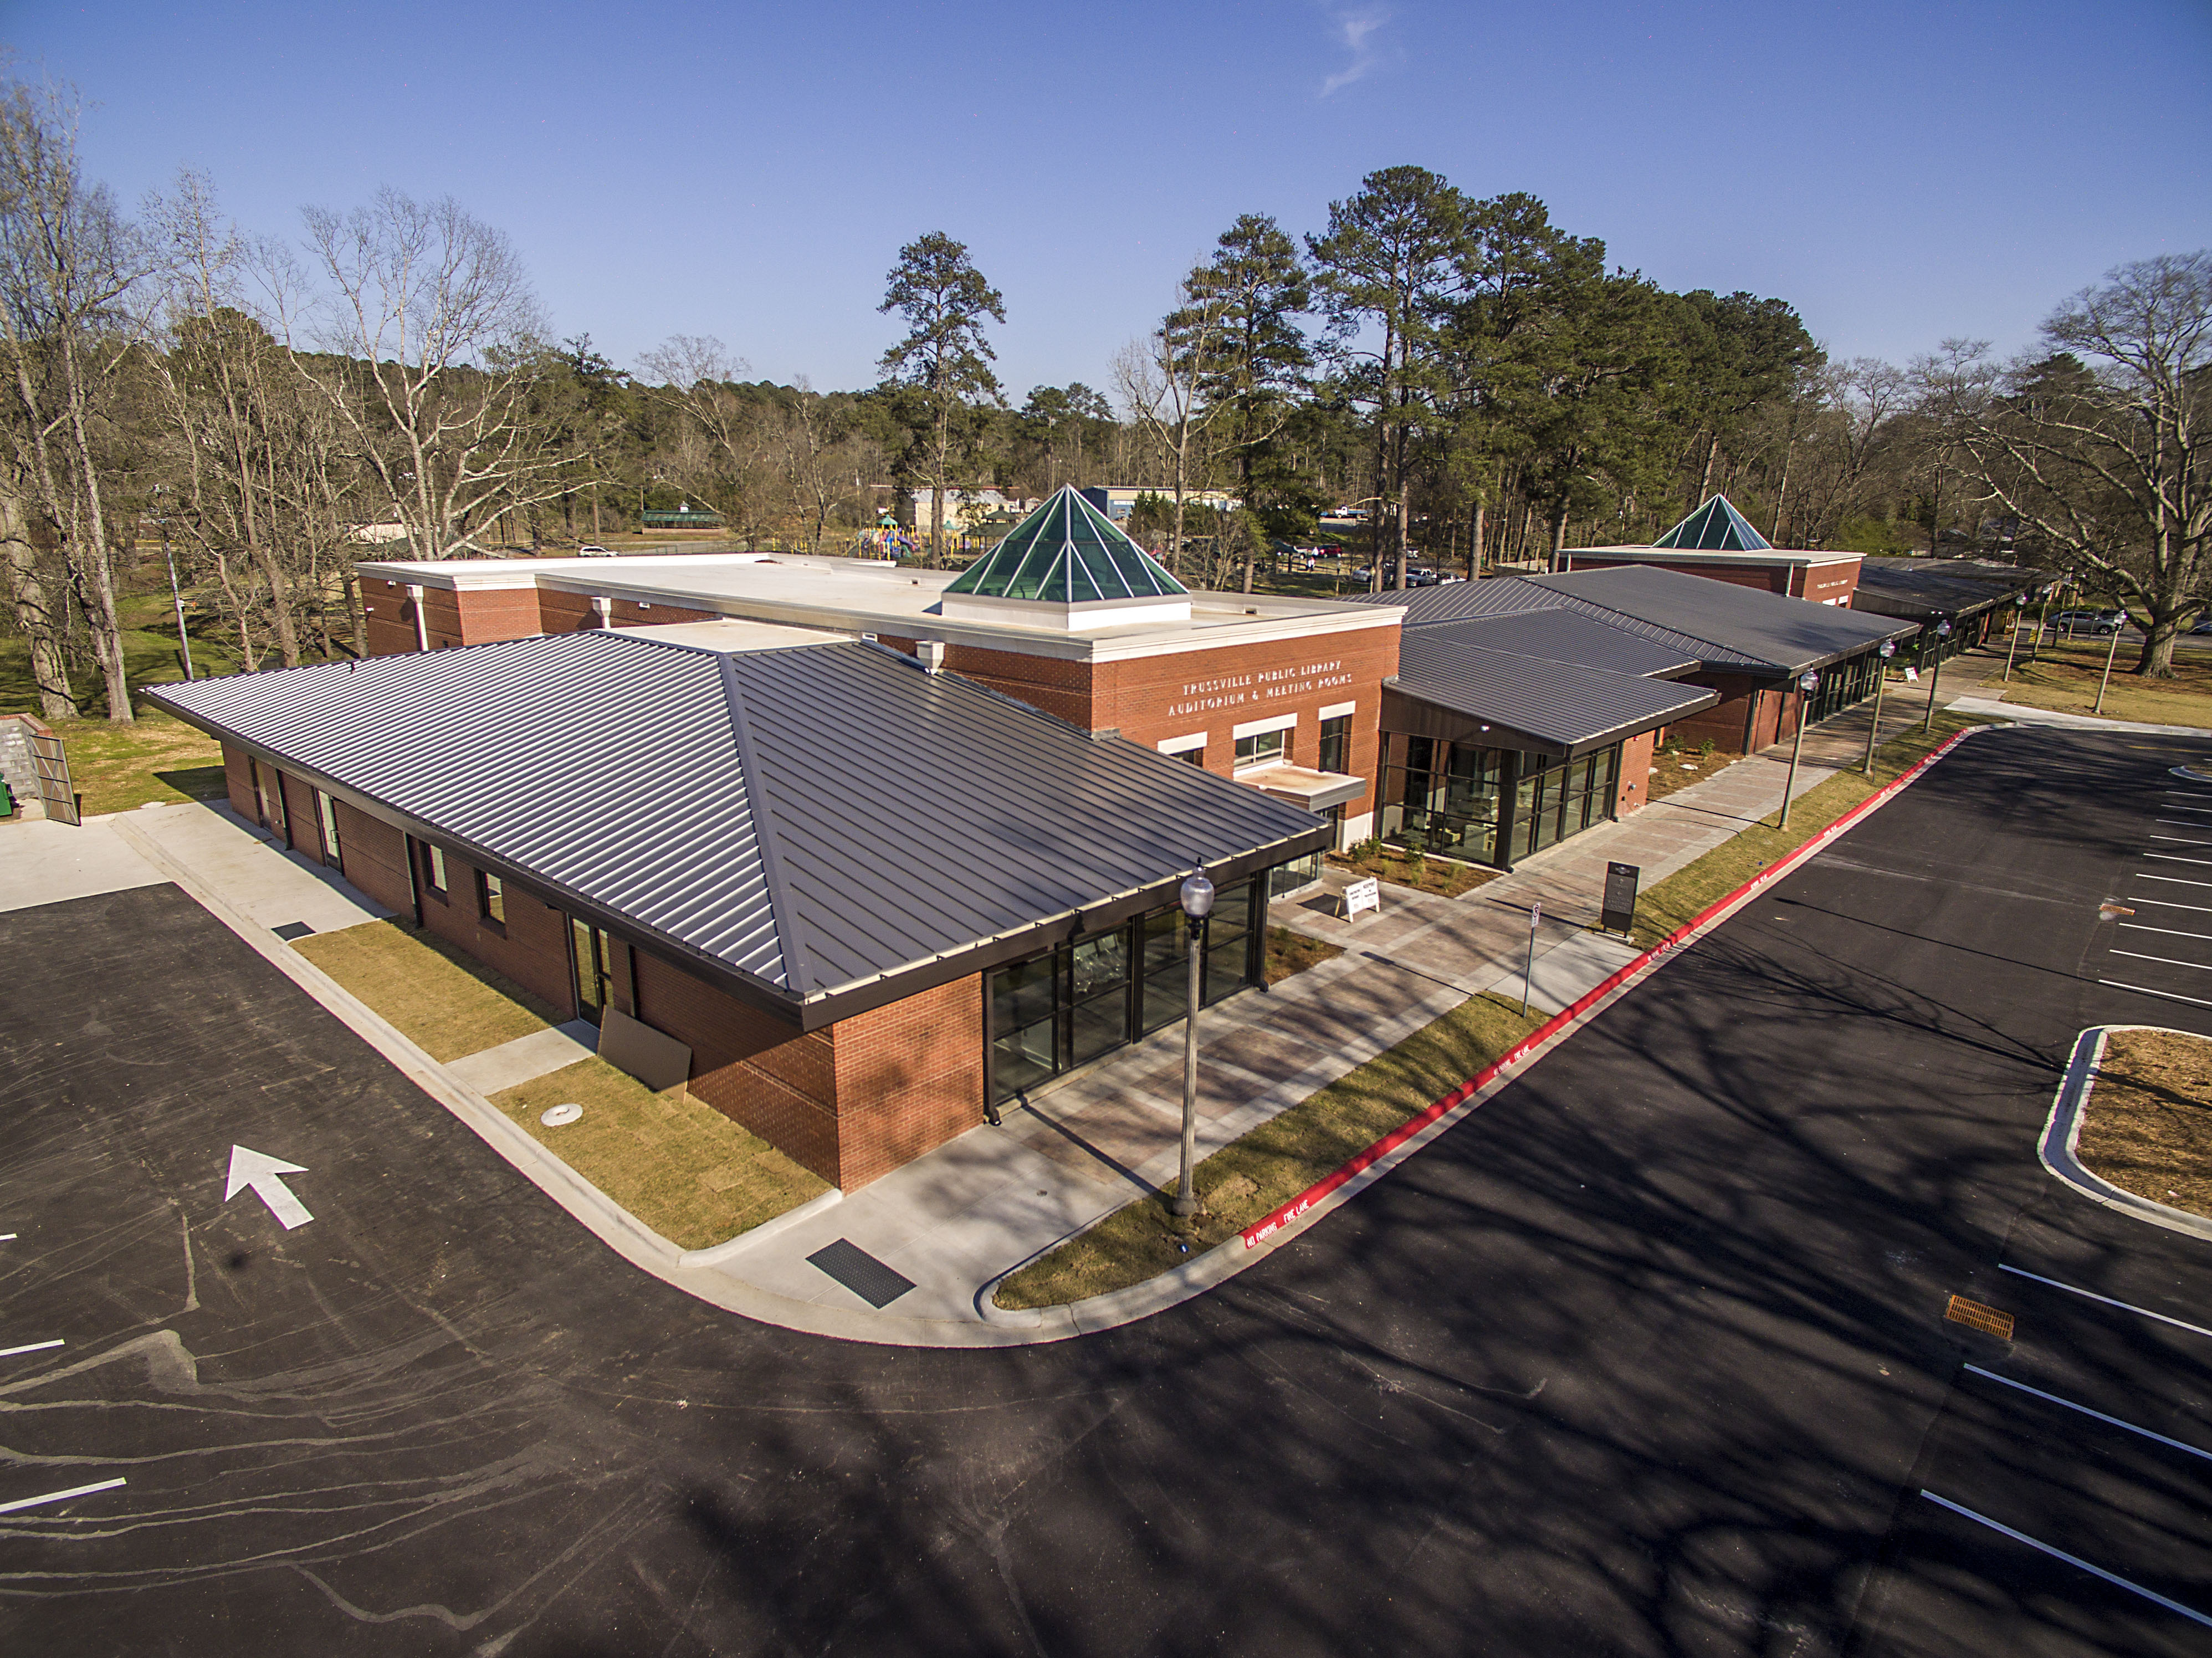 Ribbon cutting for new Trussville Public Library slated for Sunday